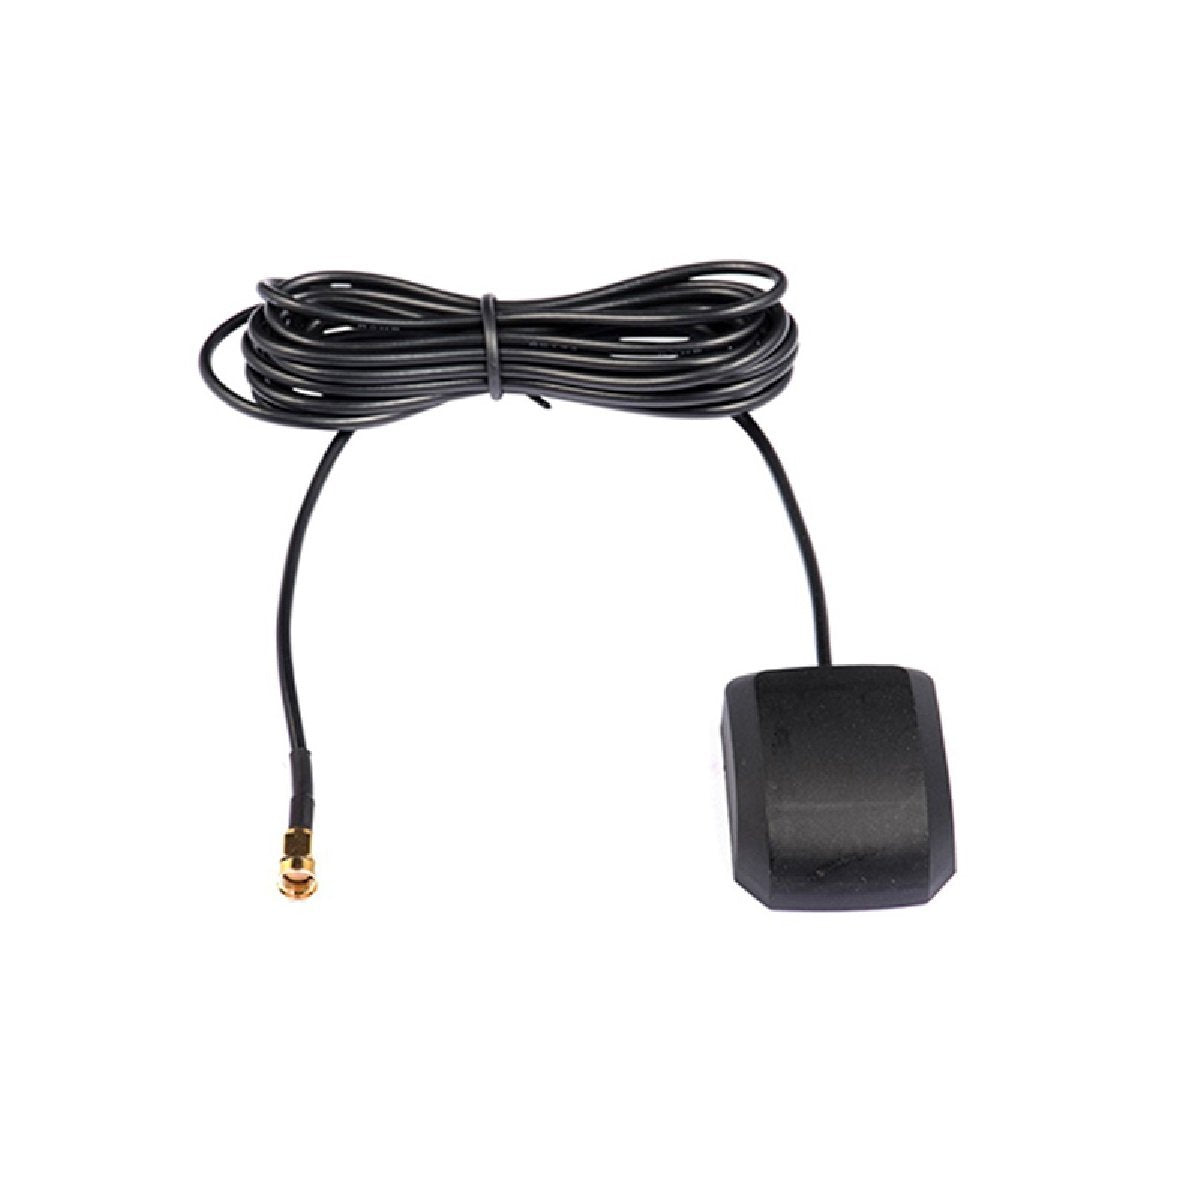 S1315RL GPS Receiver with Anteena - TTL + Serial